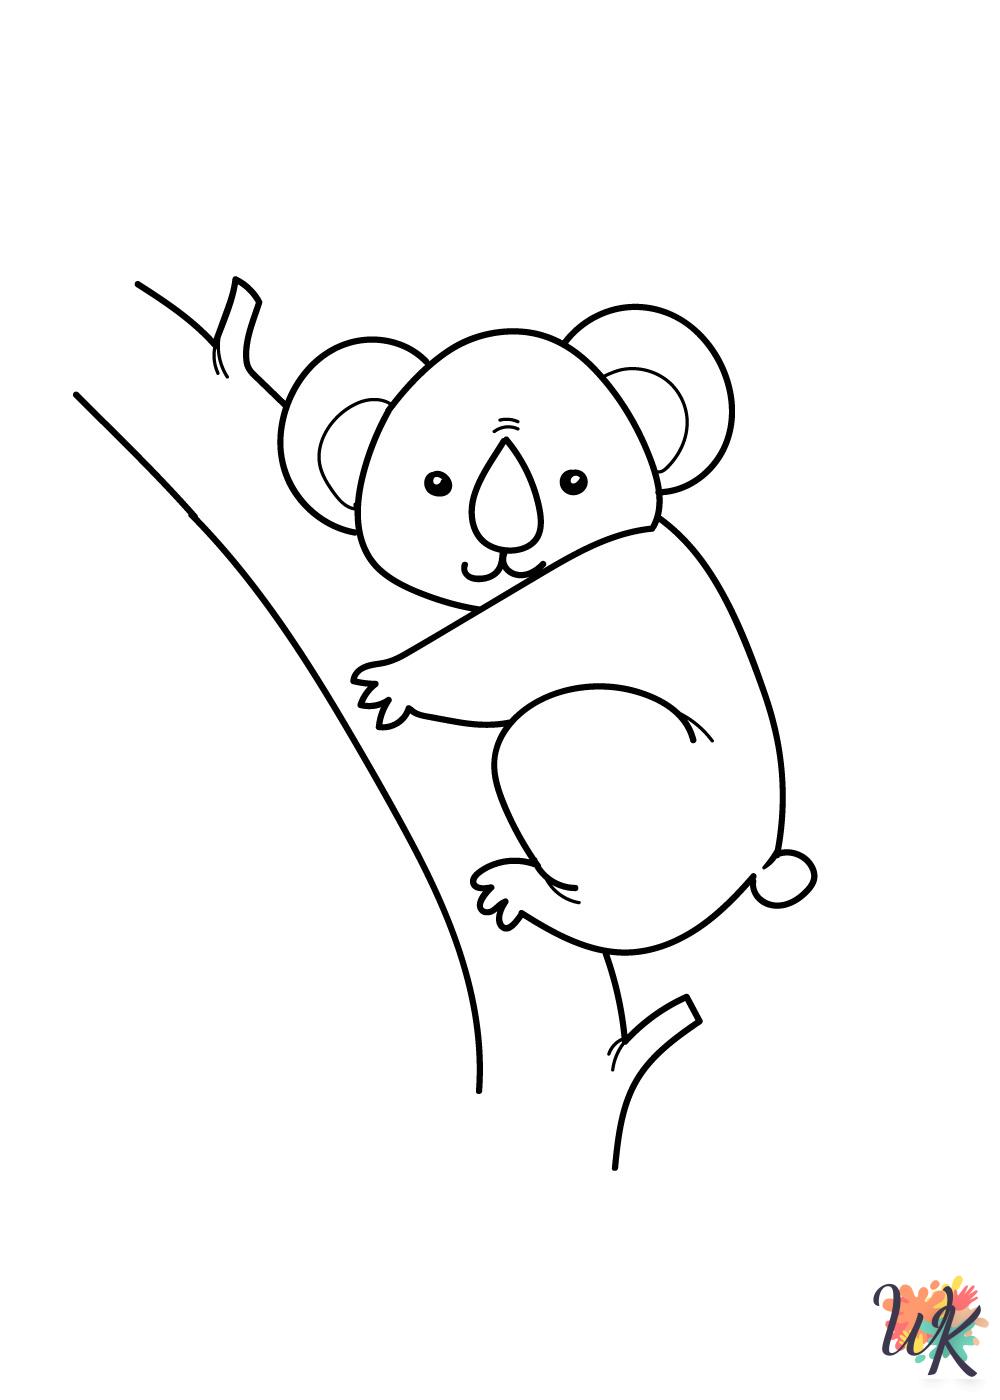 Cute Animals coloring pages printable